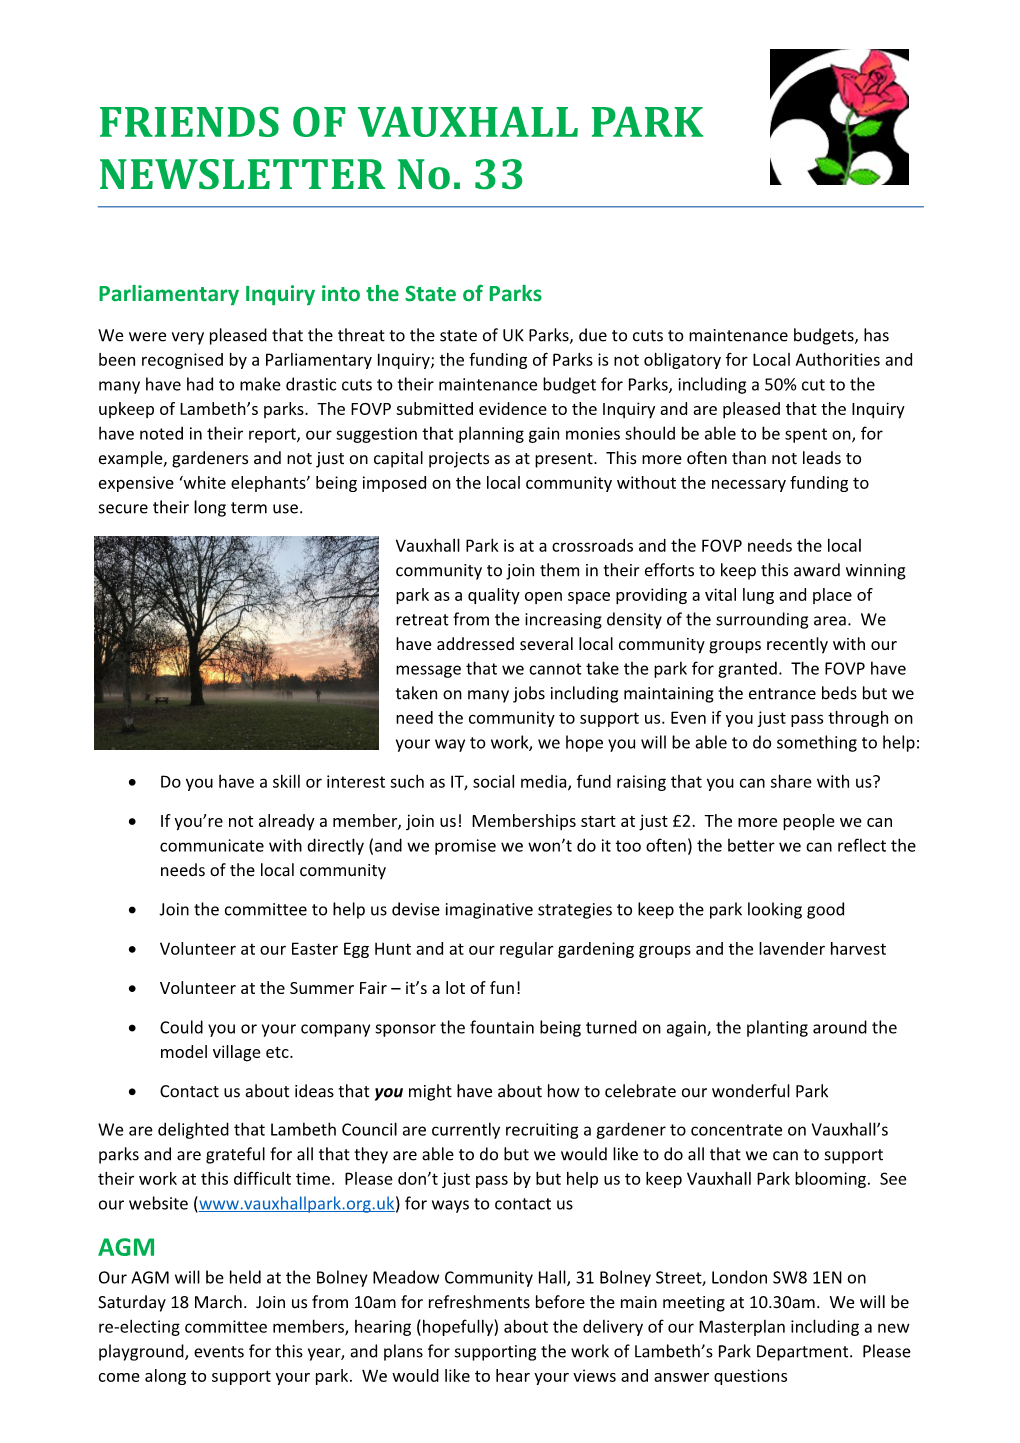 Parliamentary Inquiry Into the State of Parks